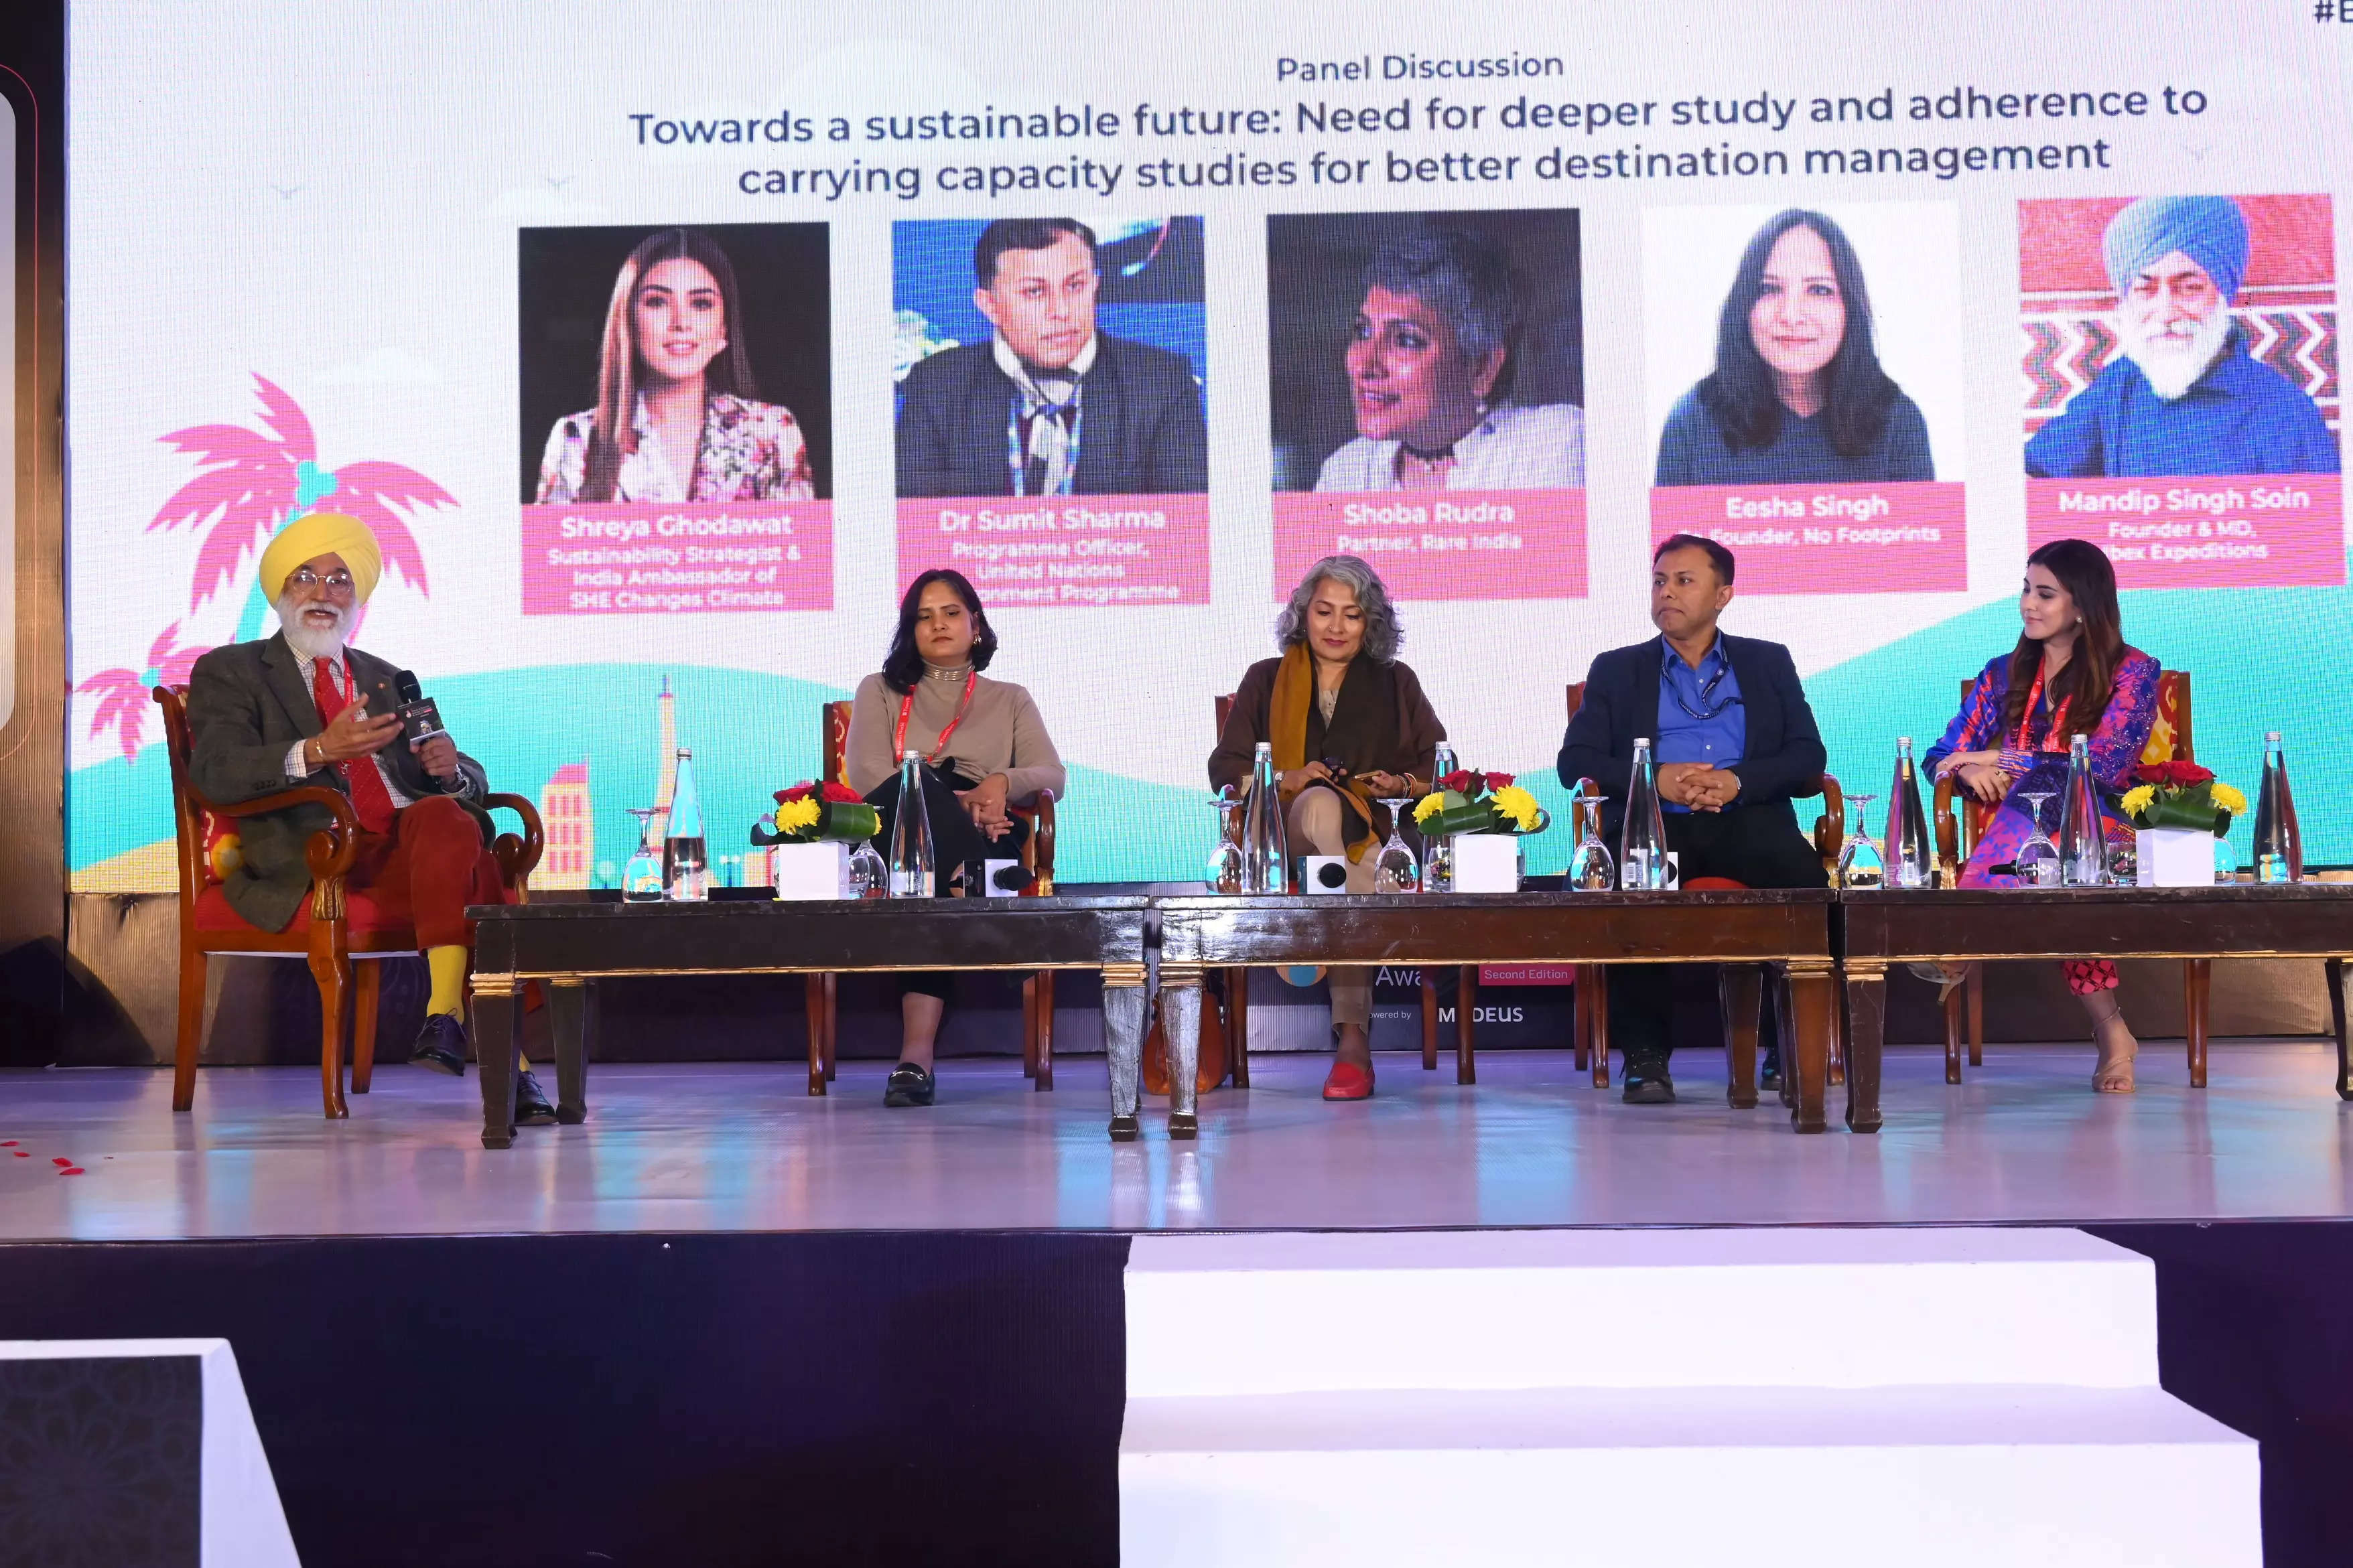 <p>ET Panel discussion: Towards a sustainable future: Need for deeper study and adherence to carrying capacity studies for better destination management</p>